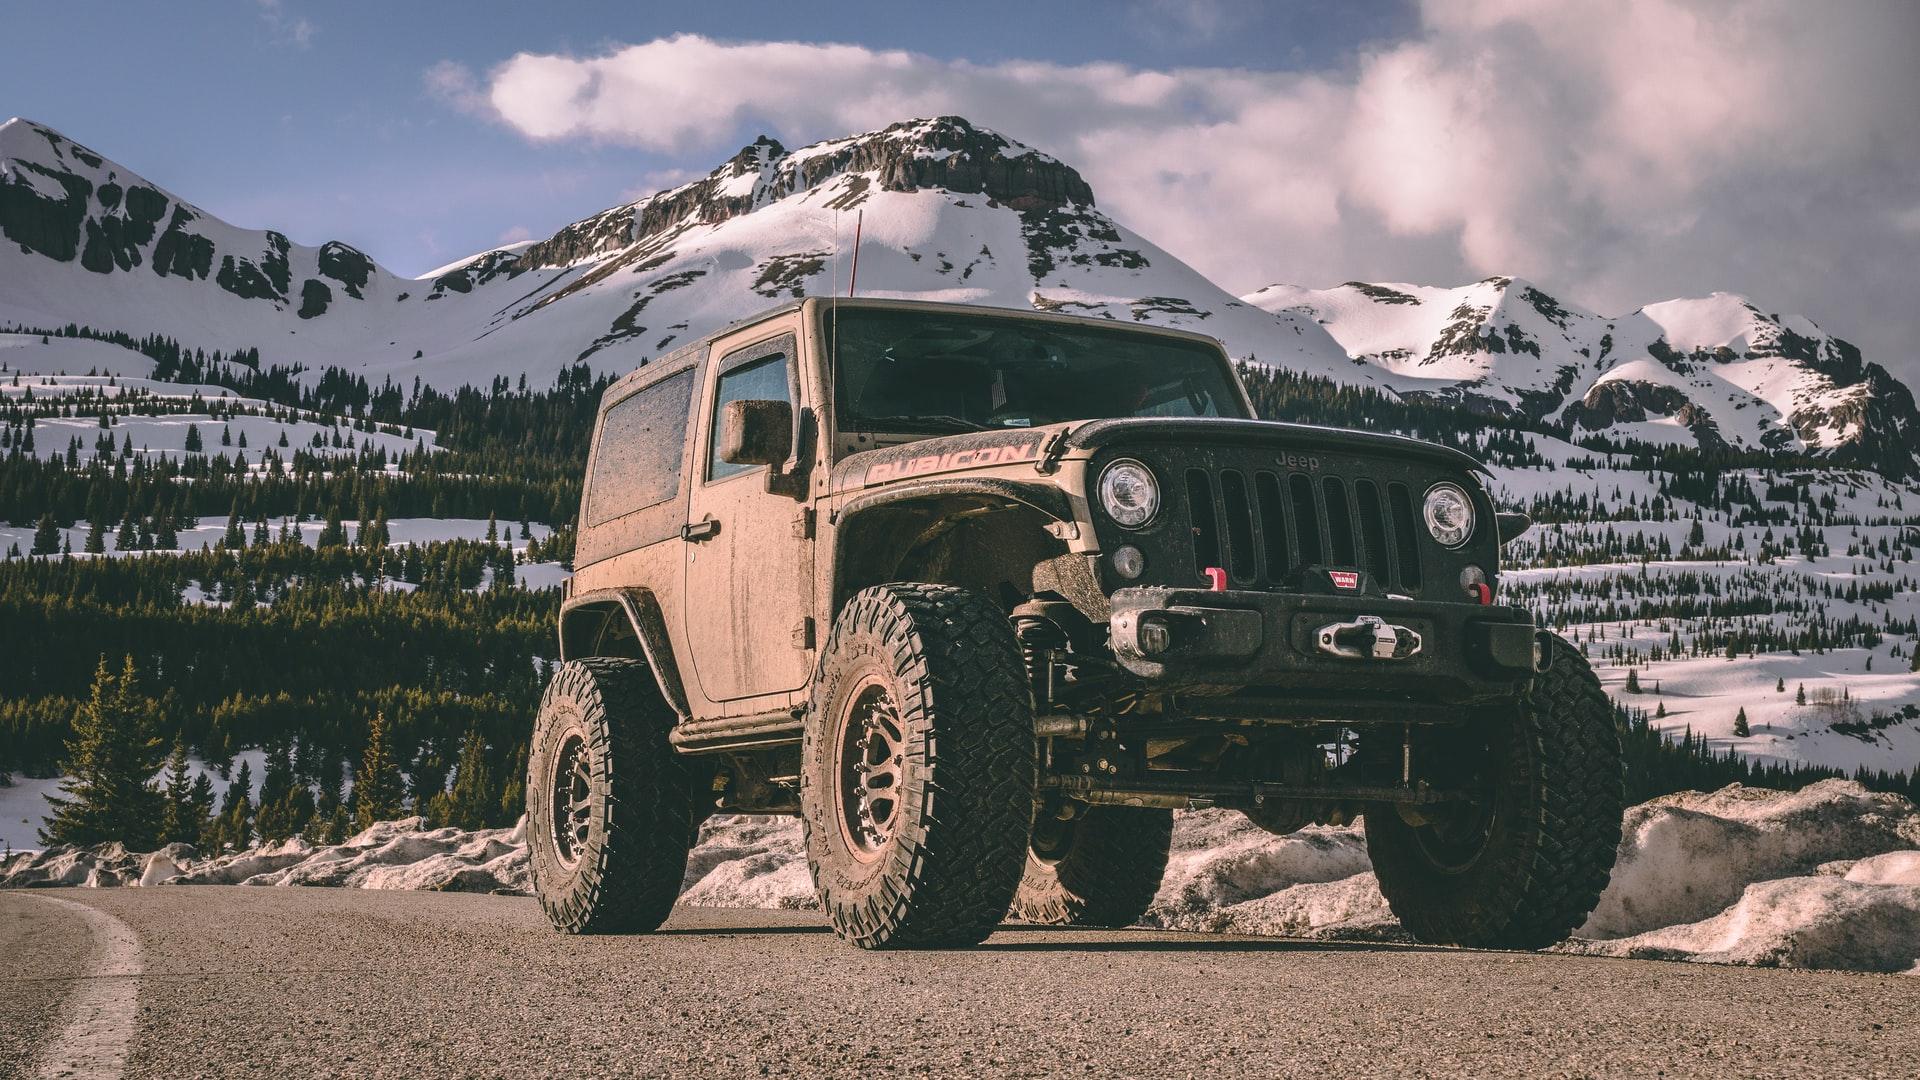 The Jeep Wrangler Unlimited is an affordable car perfect for nature-loving campers.